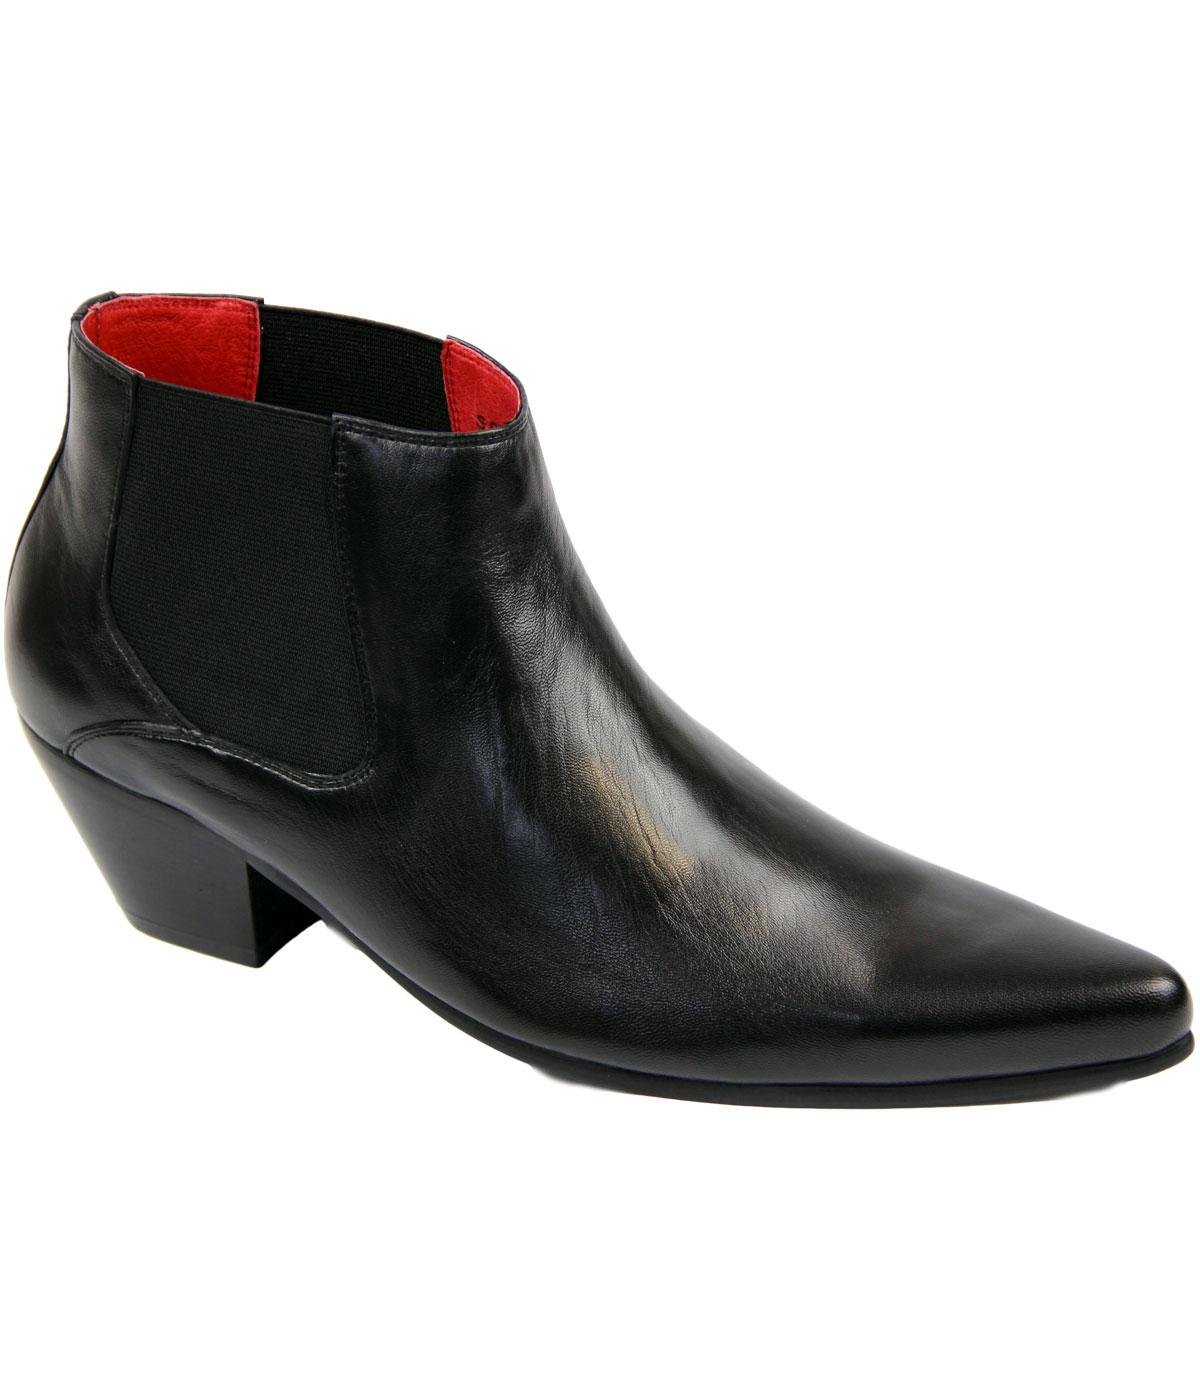 Veer3 Leather TALL PAOLO VANDINI Mod Chelsea Boots